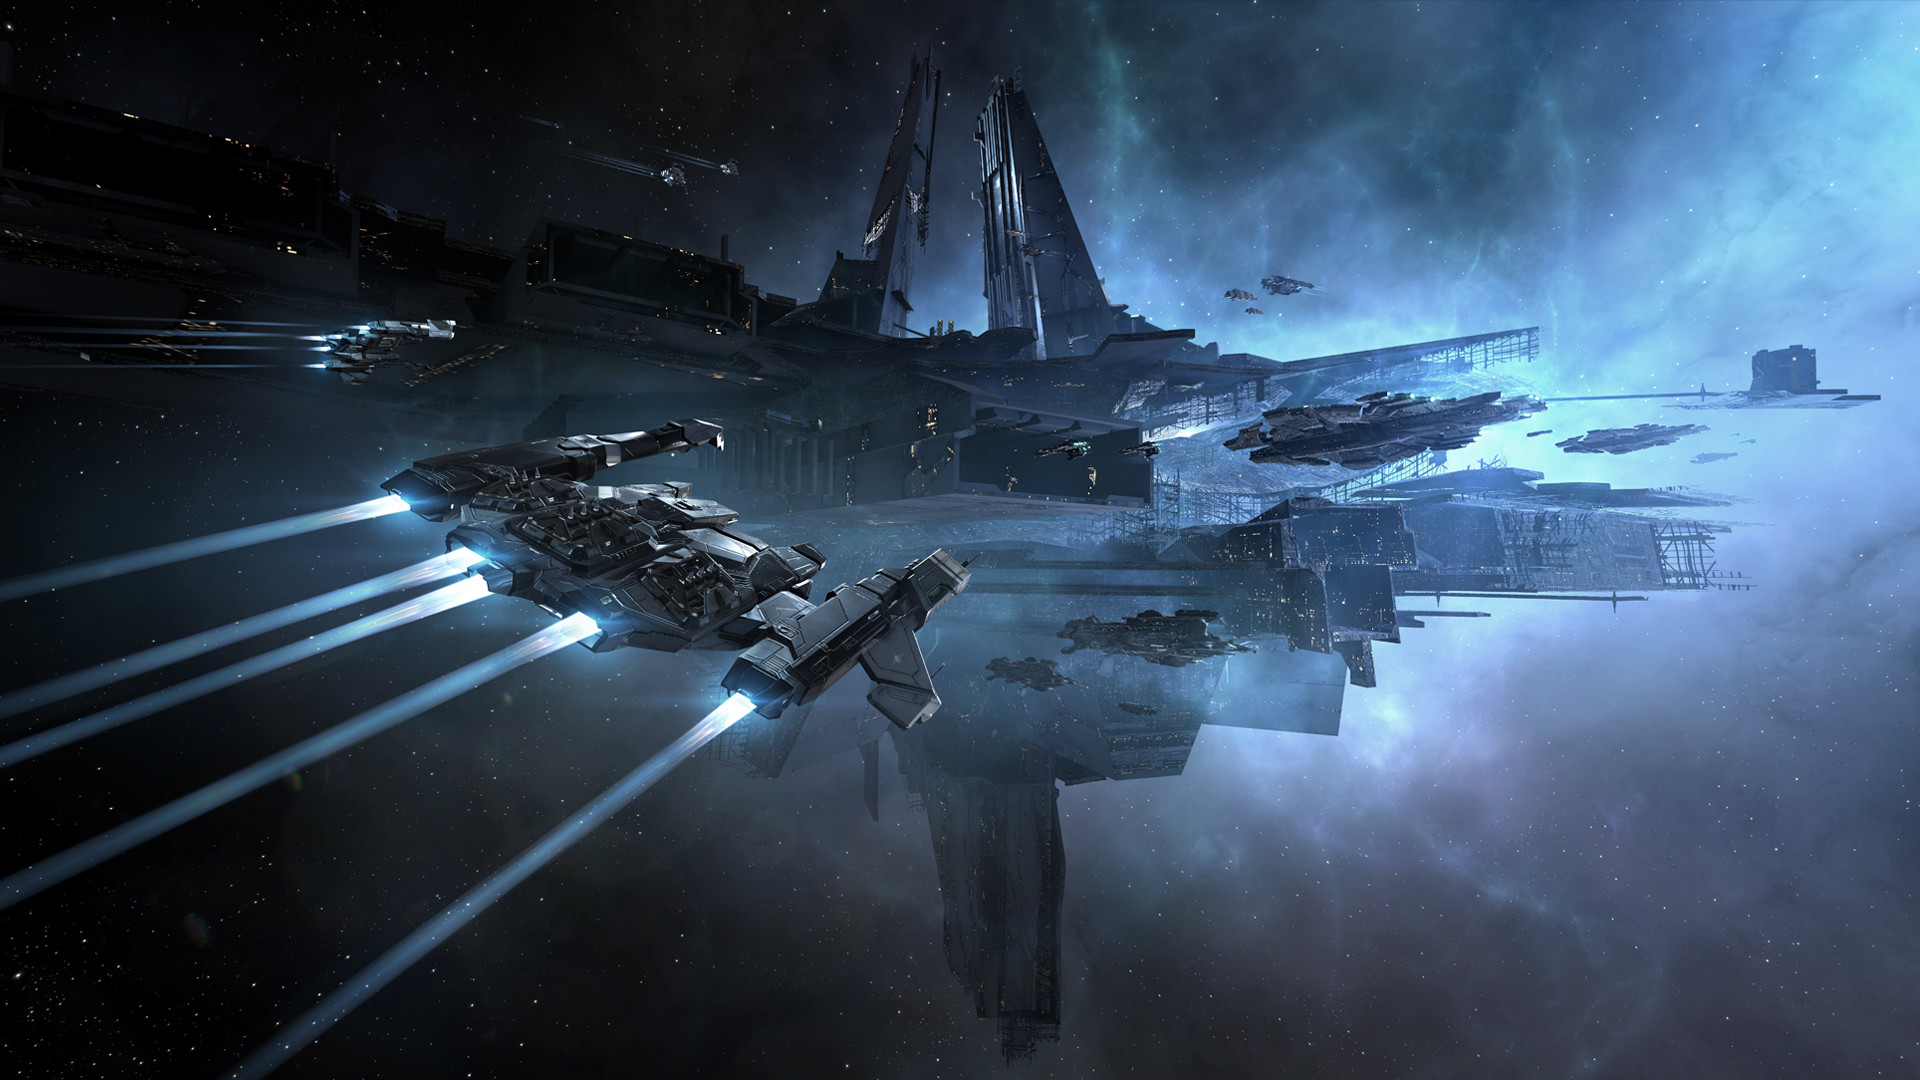 This EVE Online pilot just made history by pillaging $60,000 worth of items